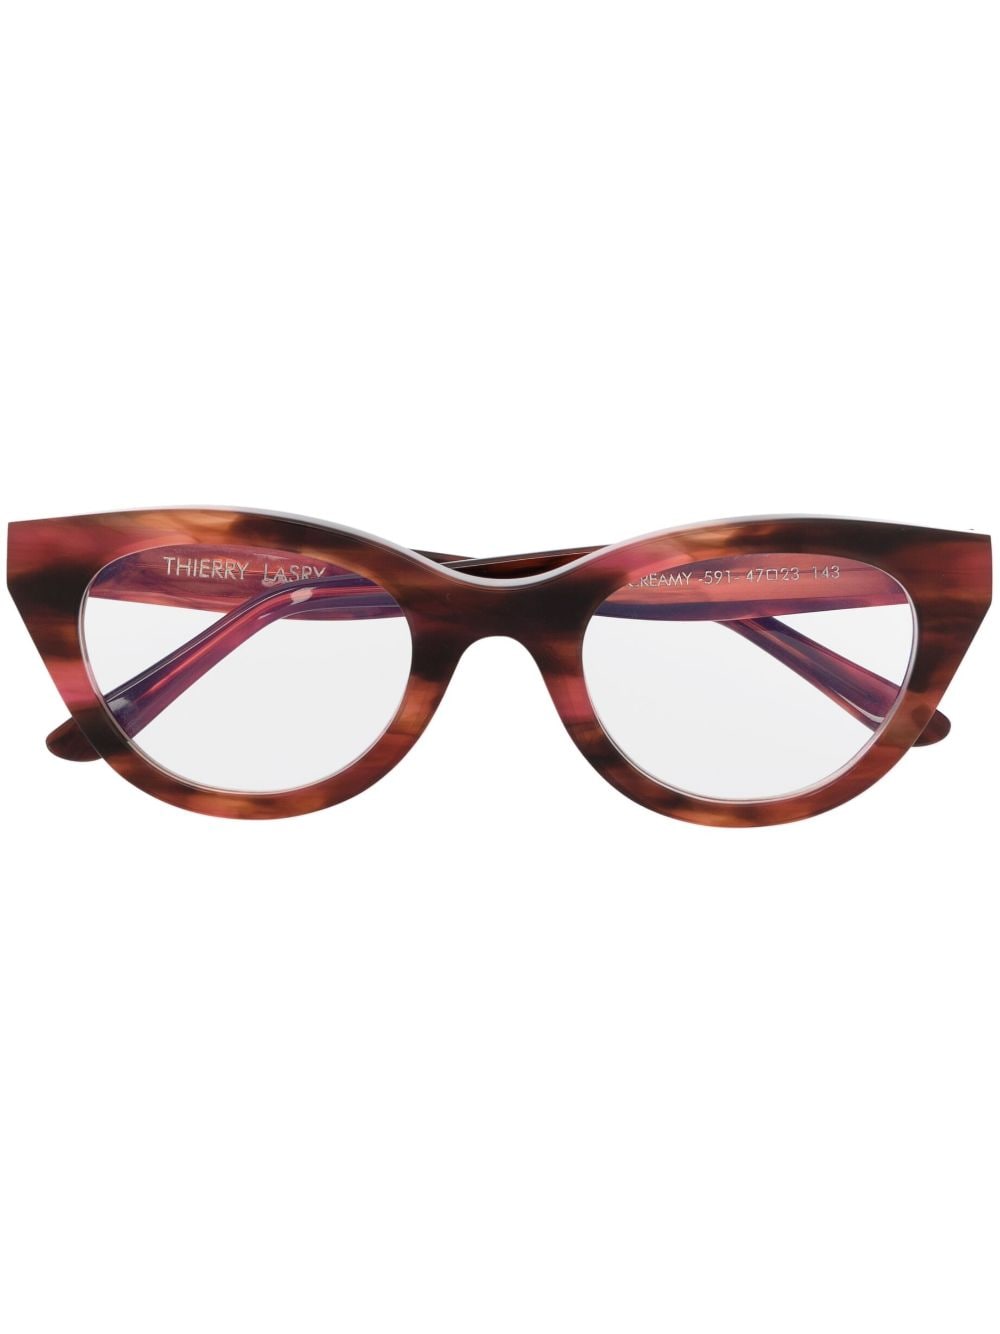 Thierry Lasry cat-eye frame glasses - Brown von Thierry Lasry